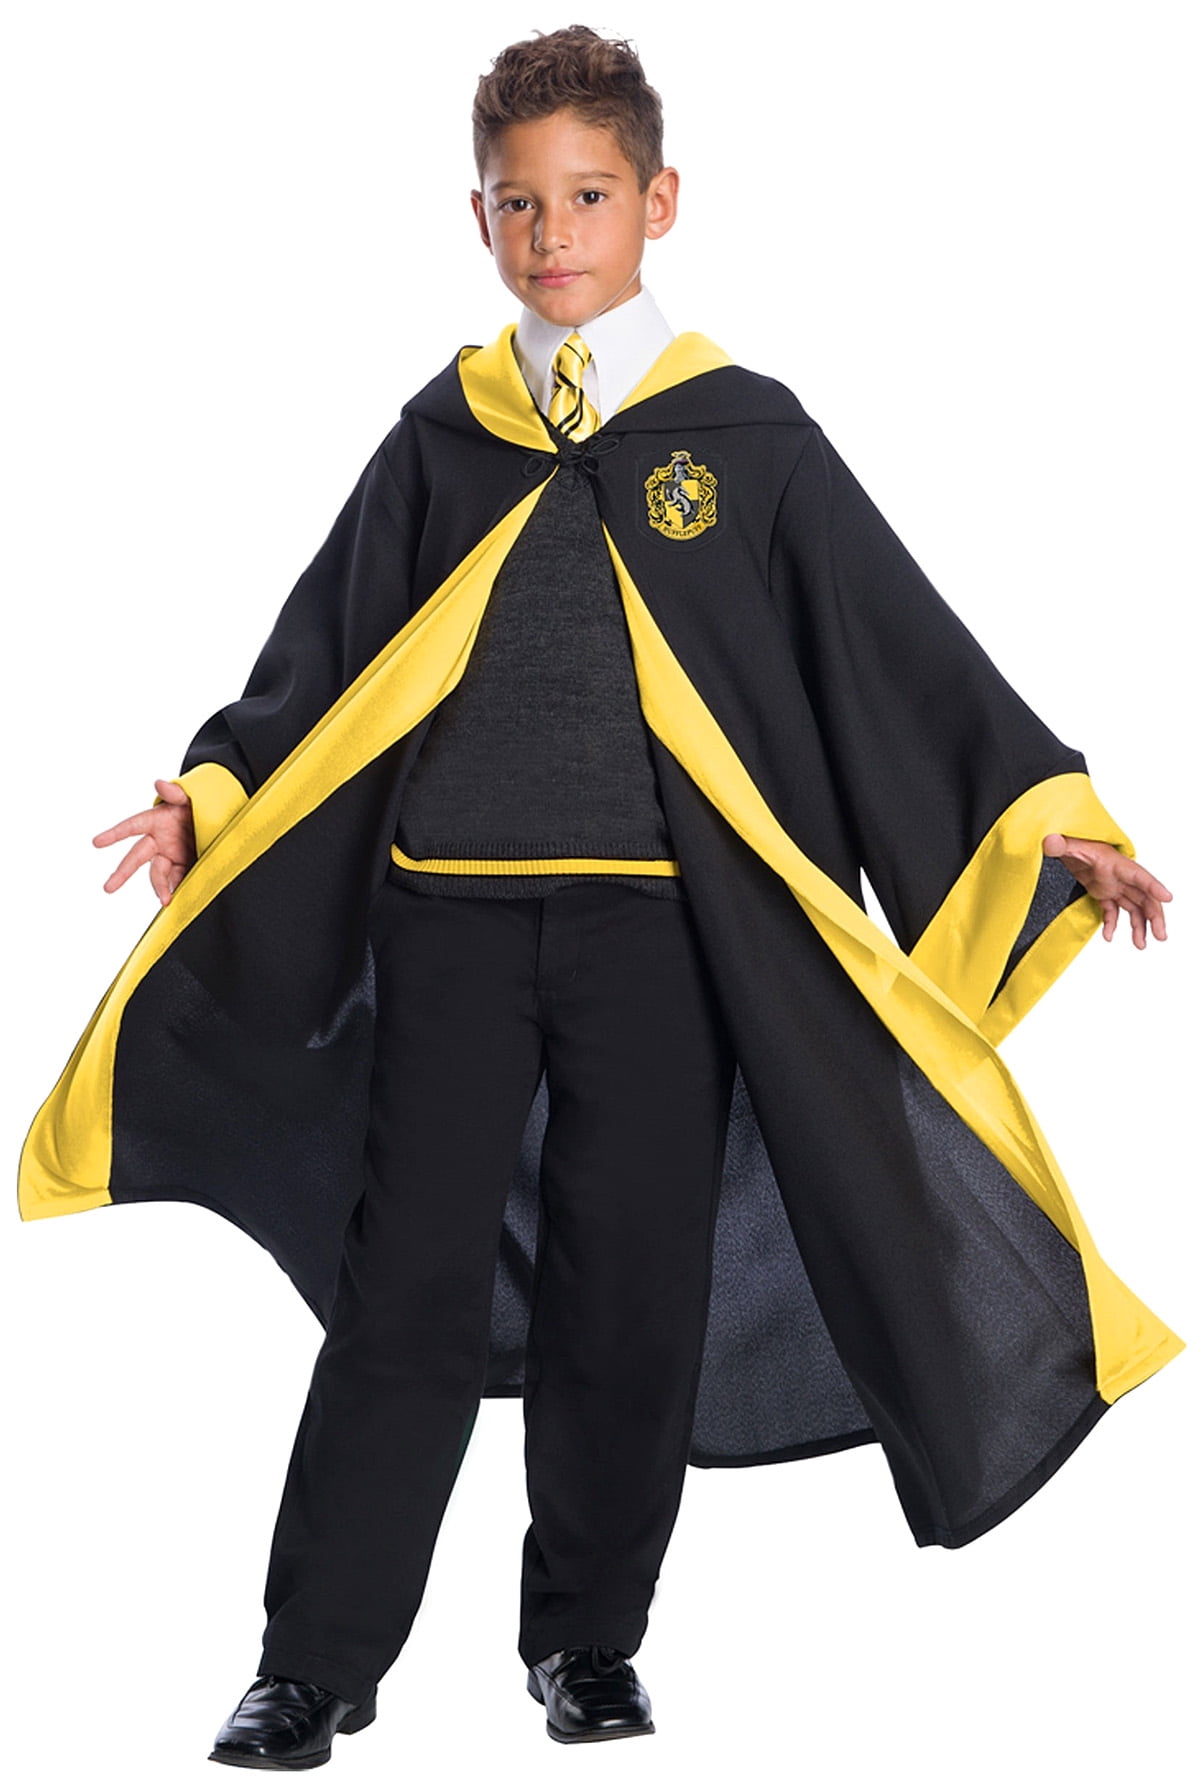 Charades Harry Potter Hufflepuff Student Children's Costume (X-Large) -  